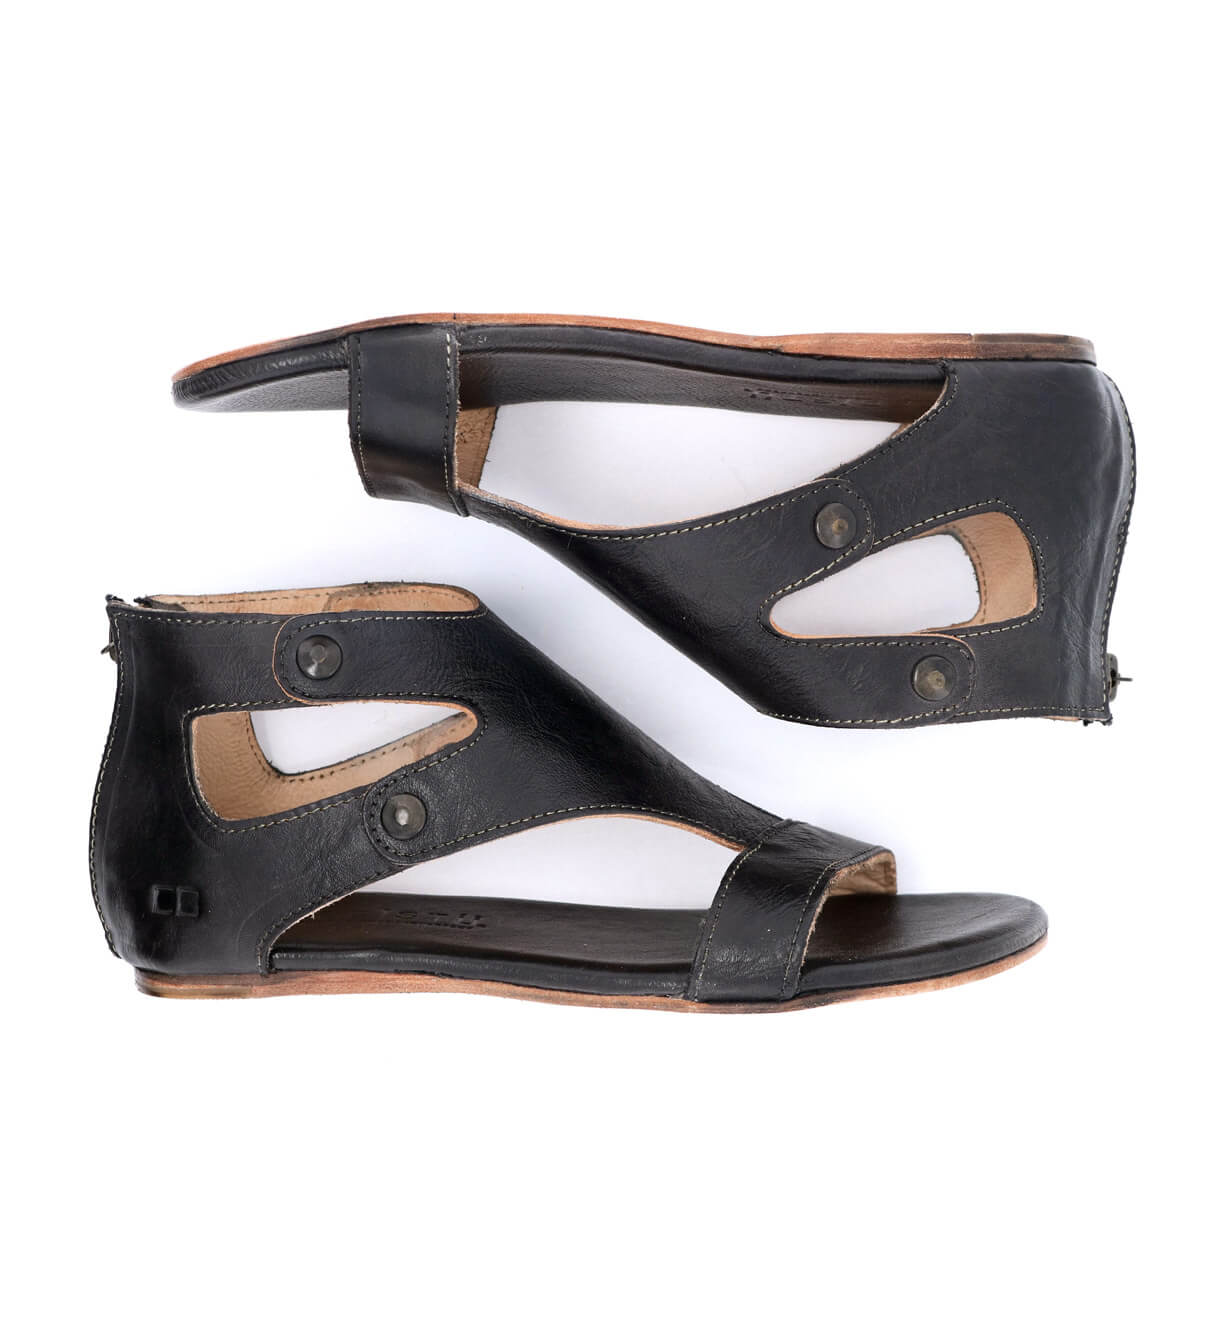 A pair of Bed Stu women's black leather Soto sandals.